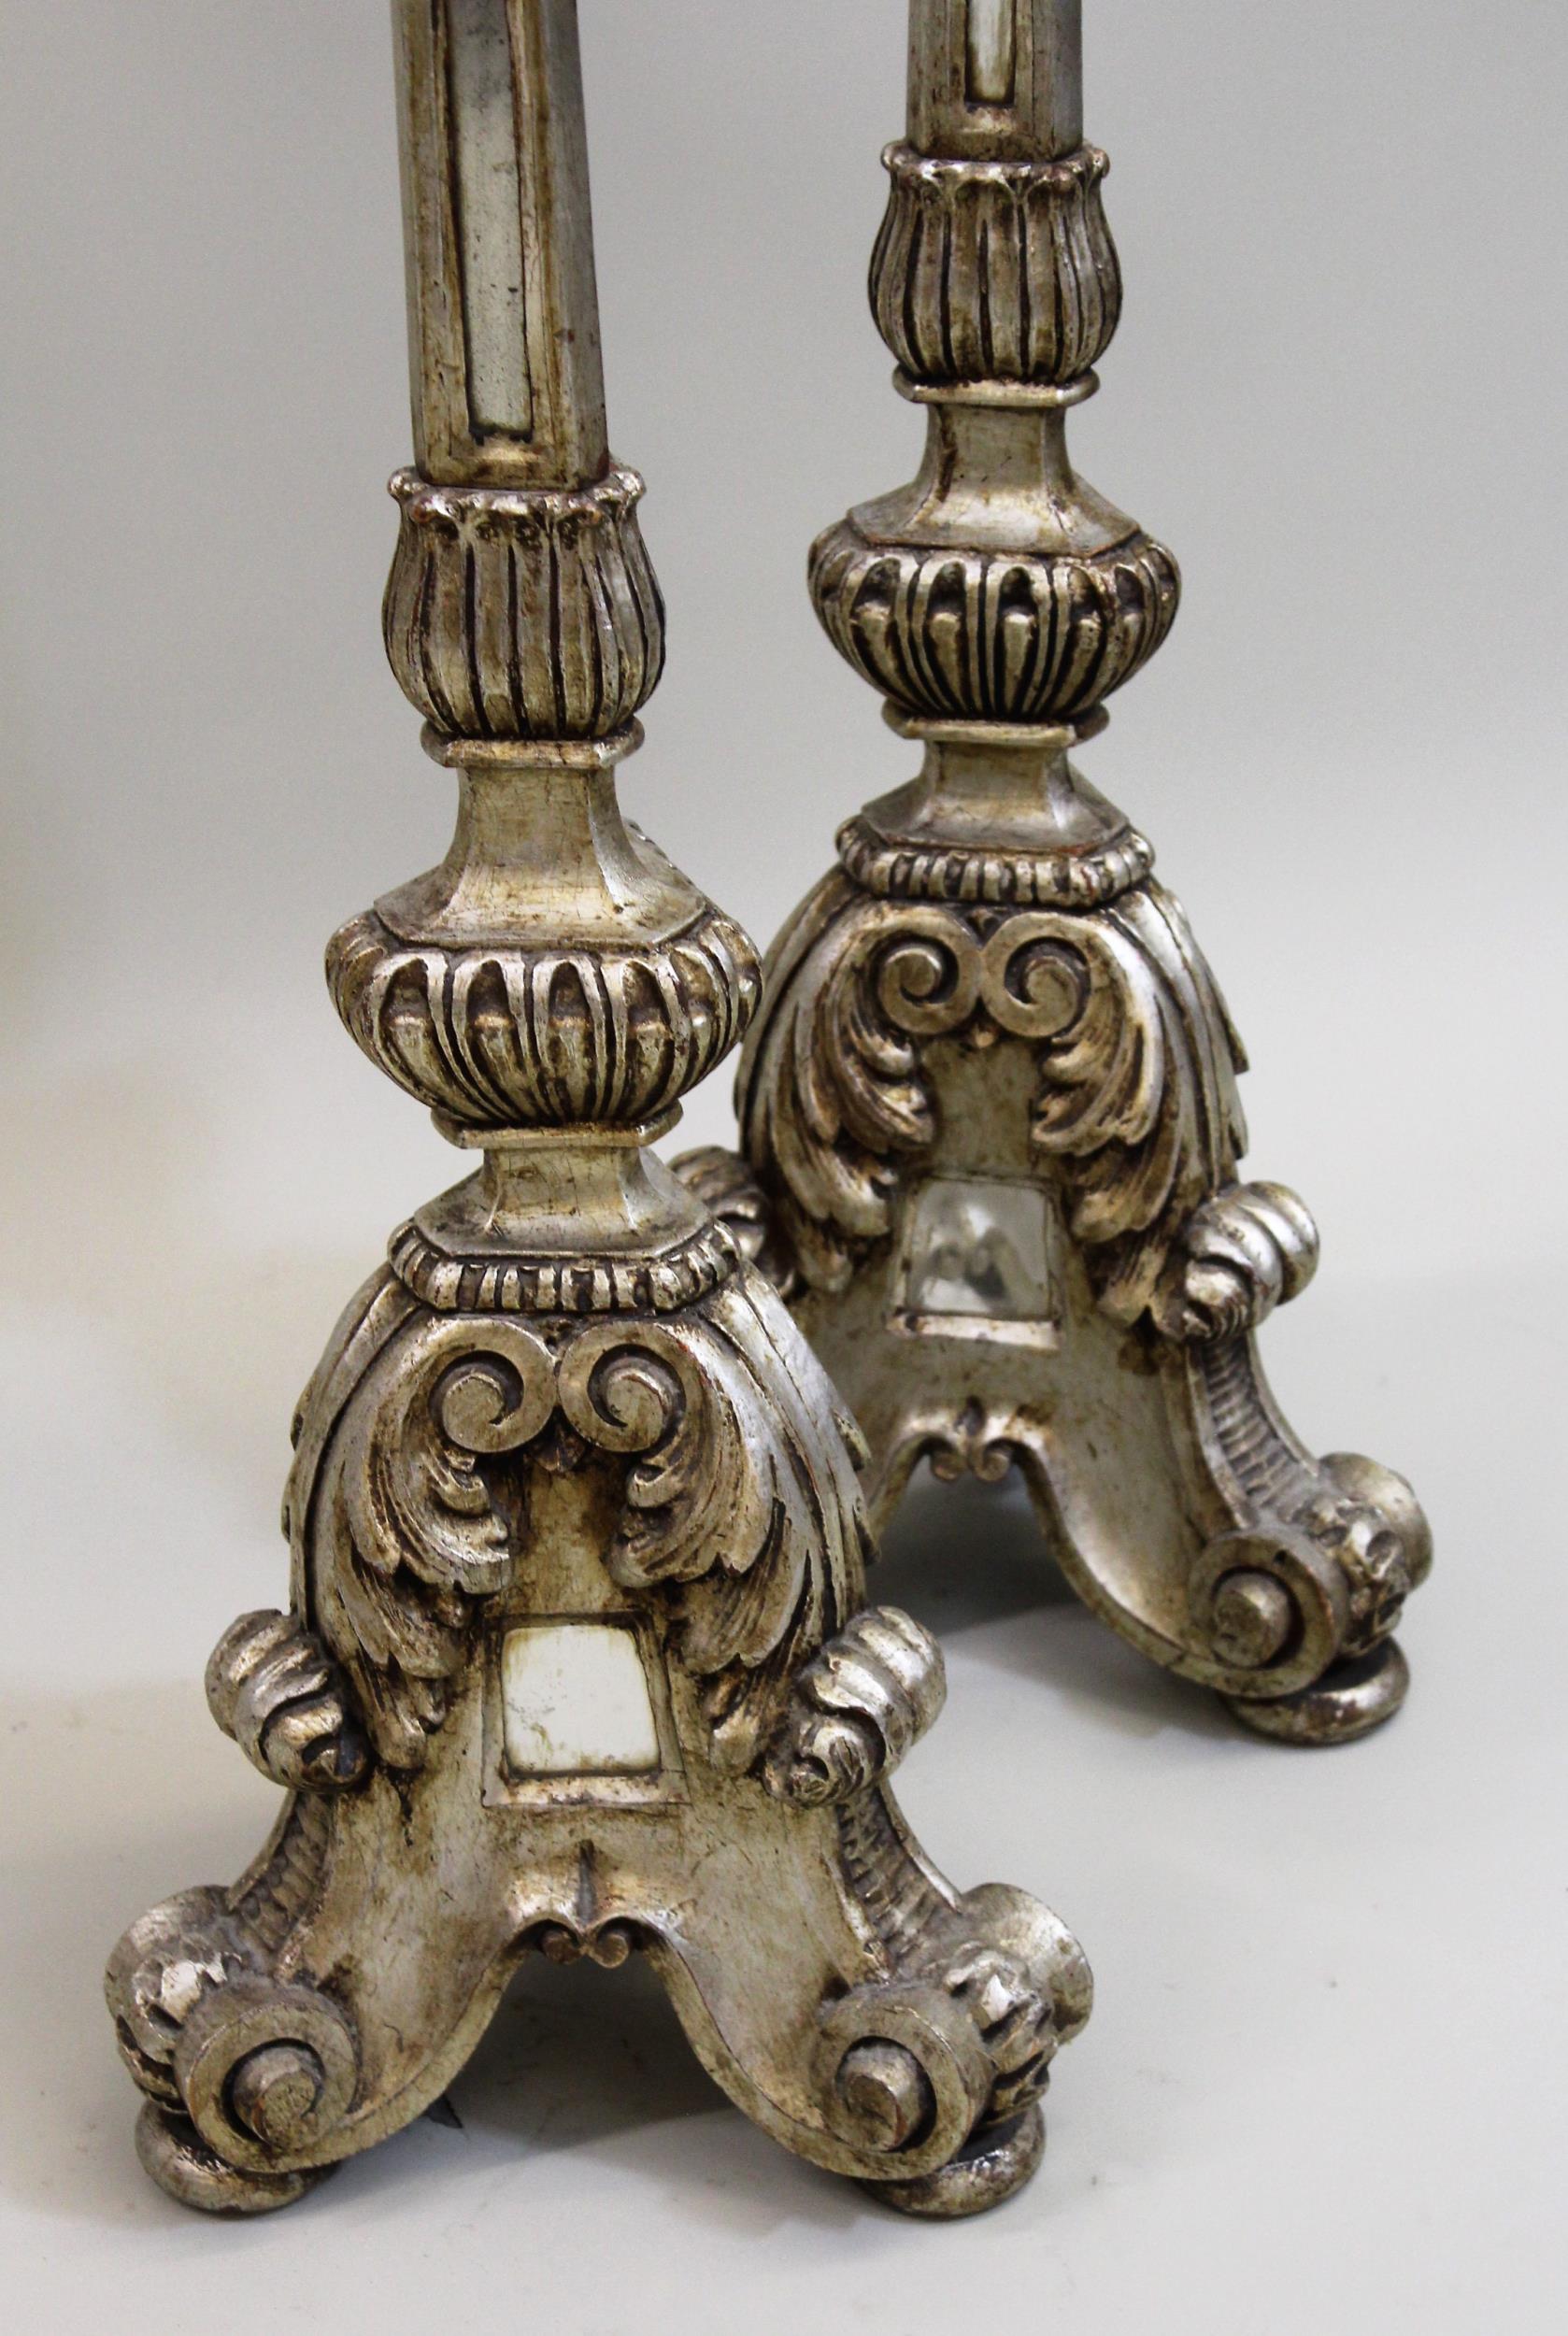 Pair of silvered and mirror inset lamp standards, with triform bases in 17th Century Dutch style, - Image 2 of 2